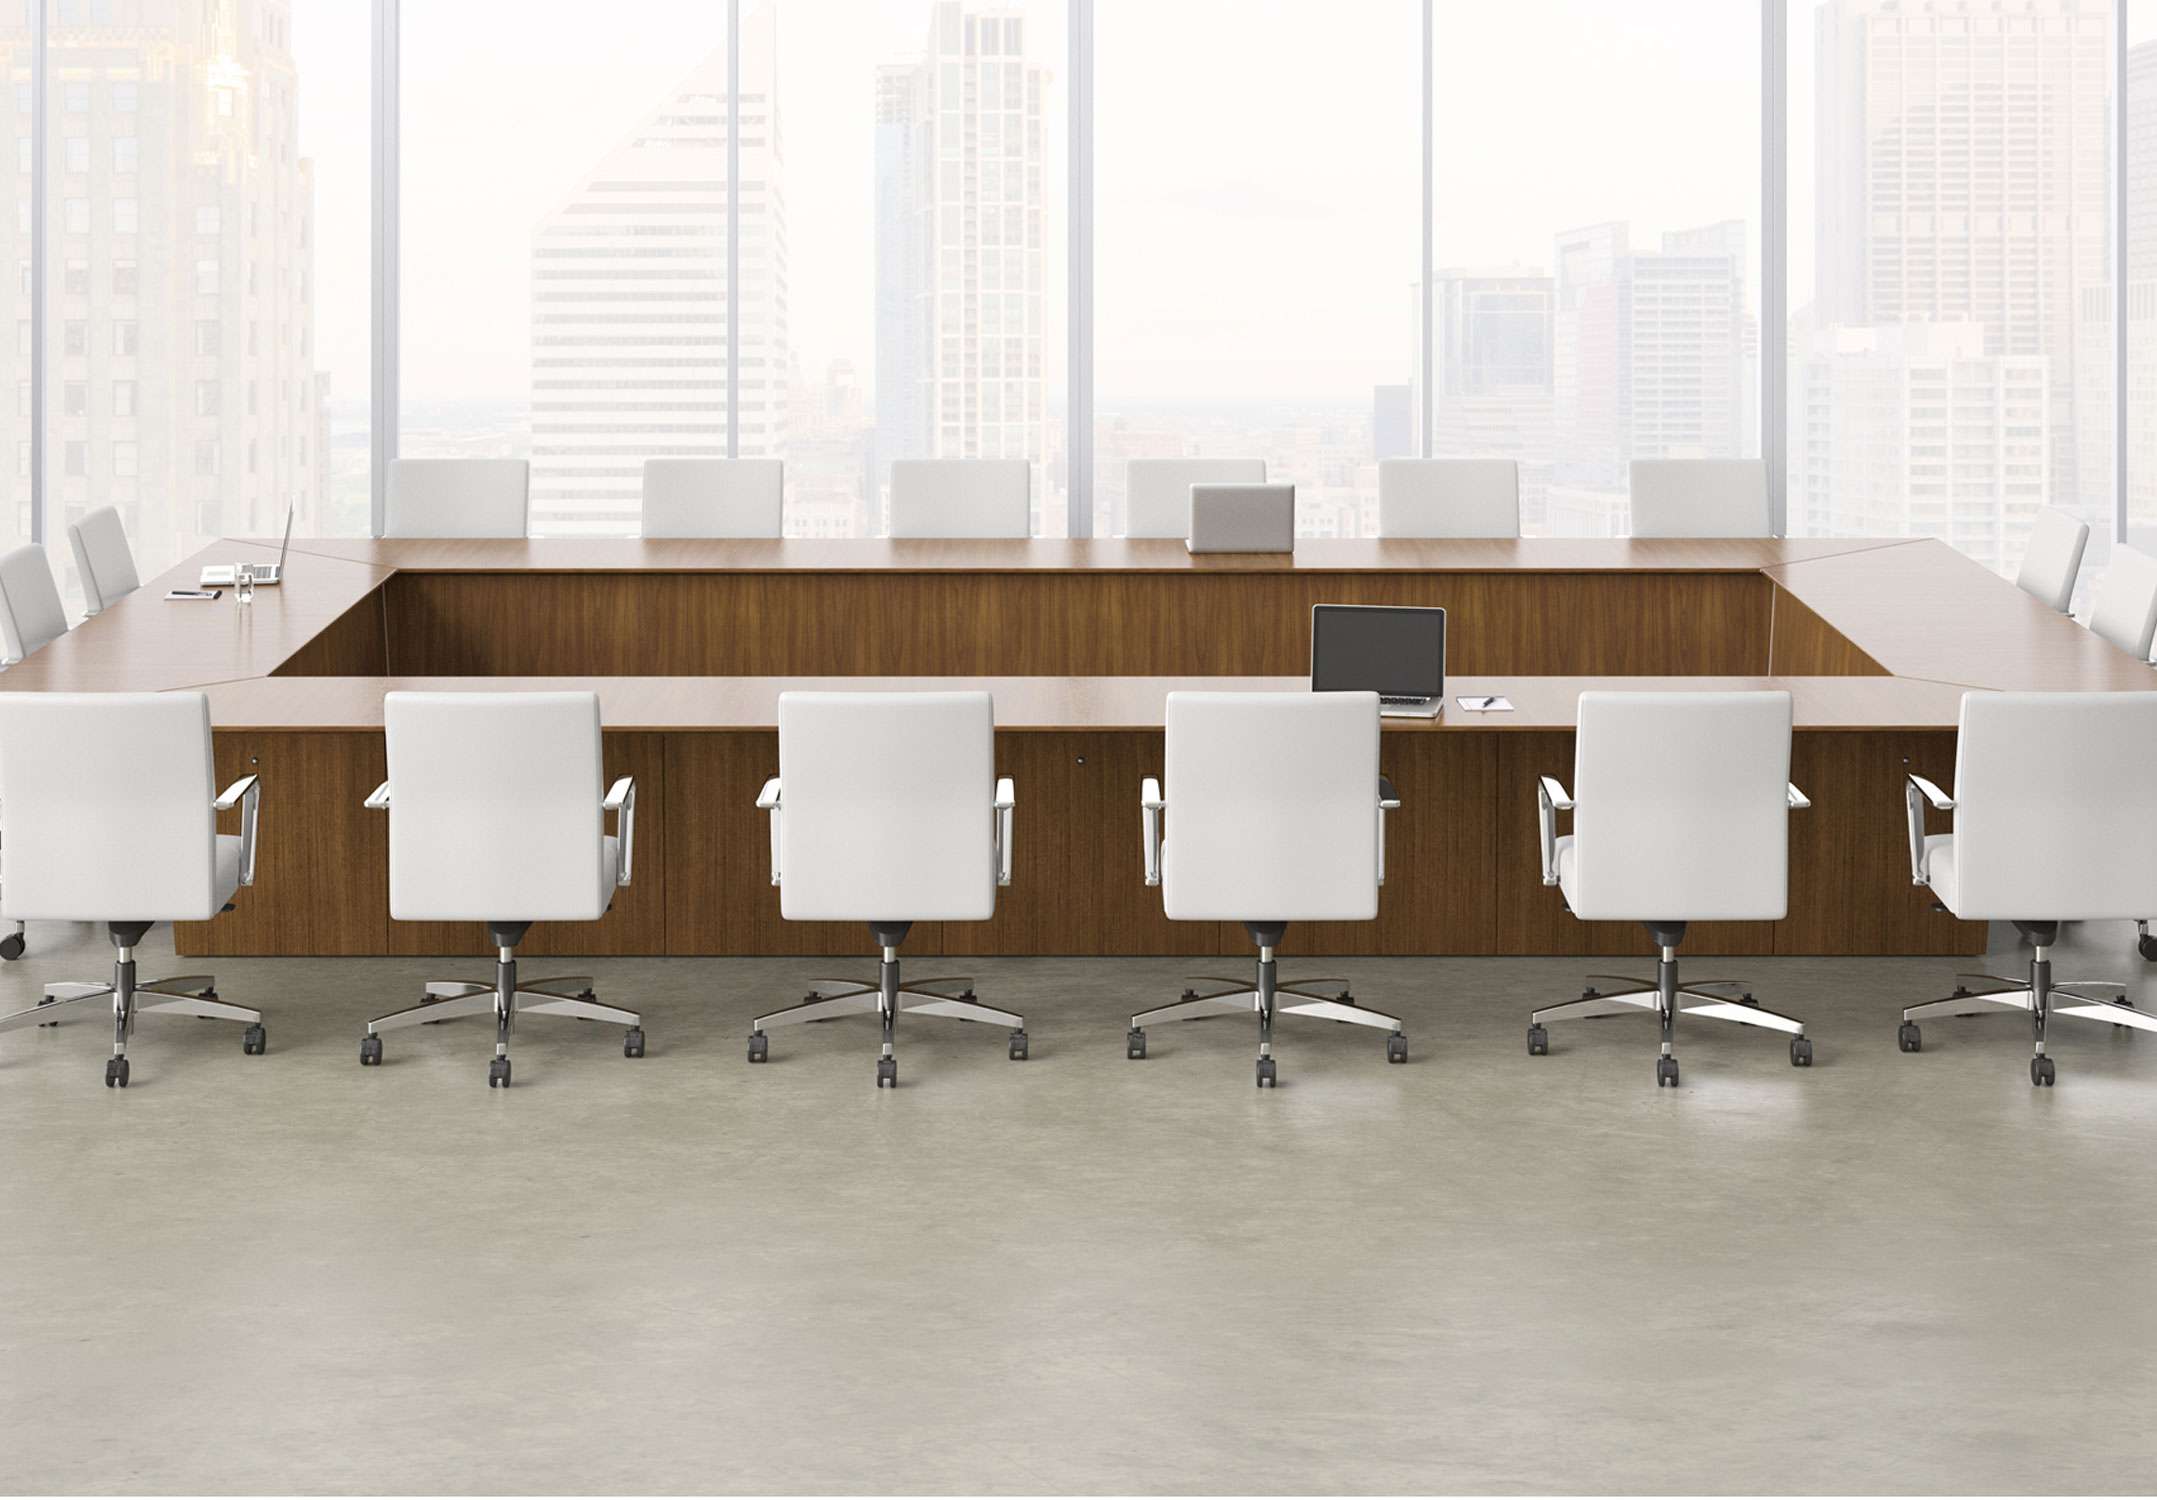 corporate conference rooms